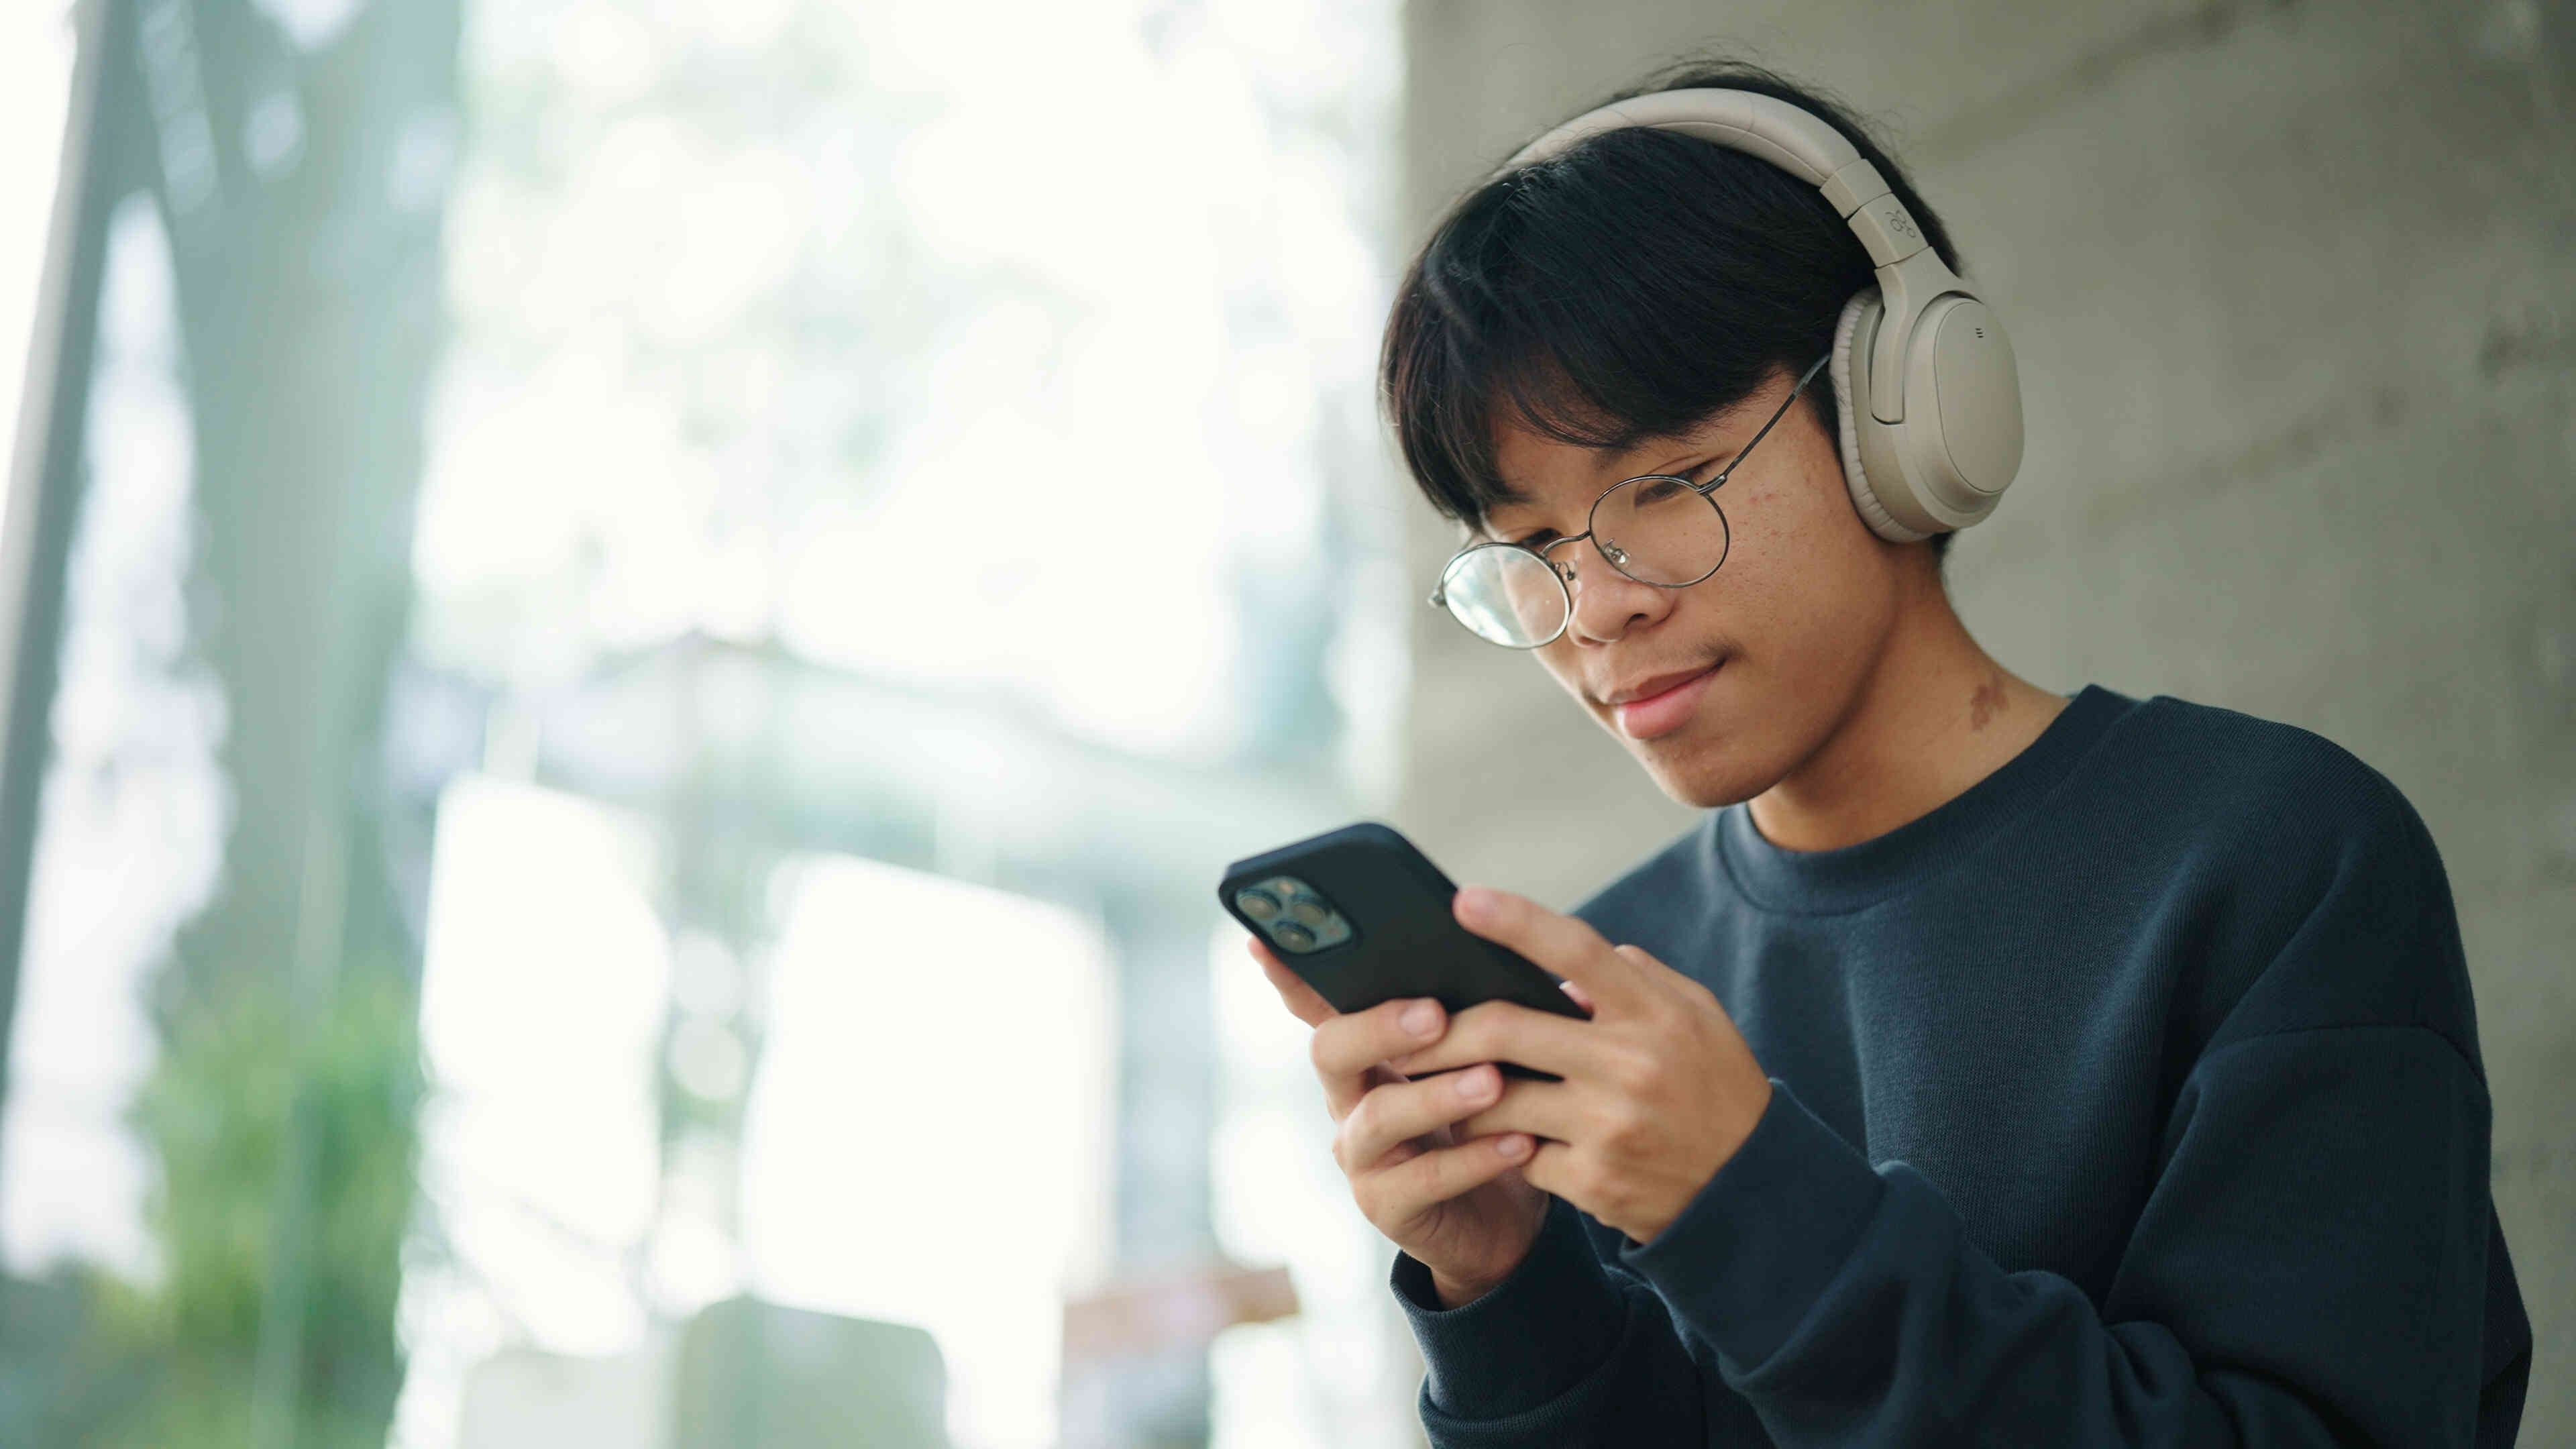 A close up of a teen boy wearing headphones as he looks down at the cellphone in his hands.